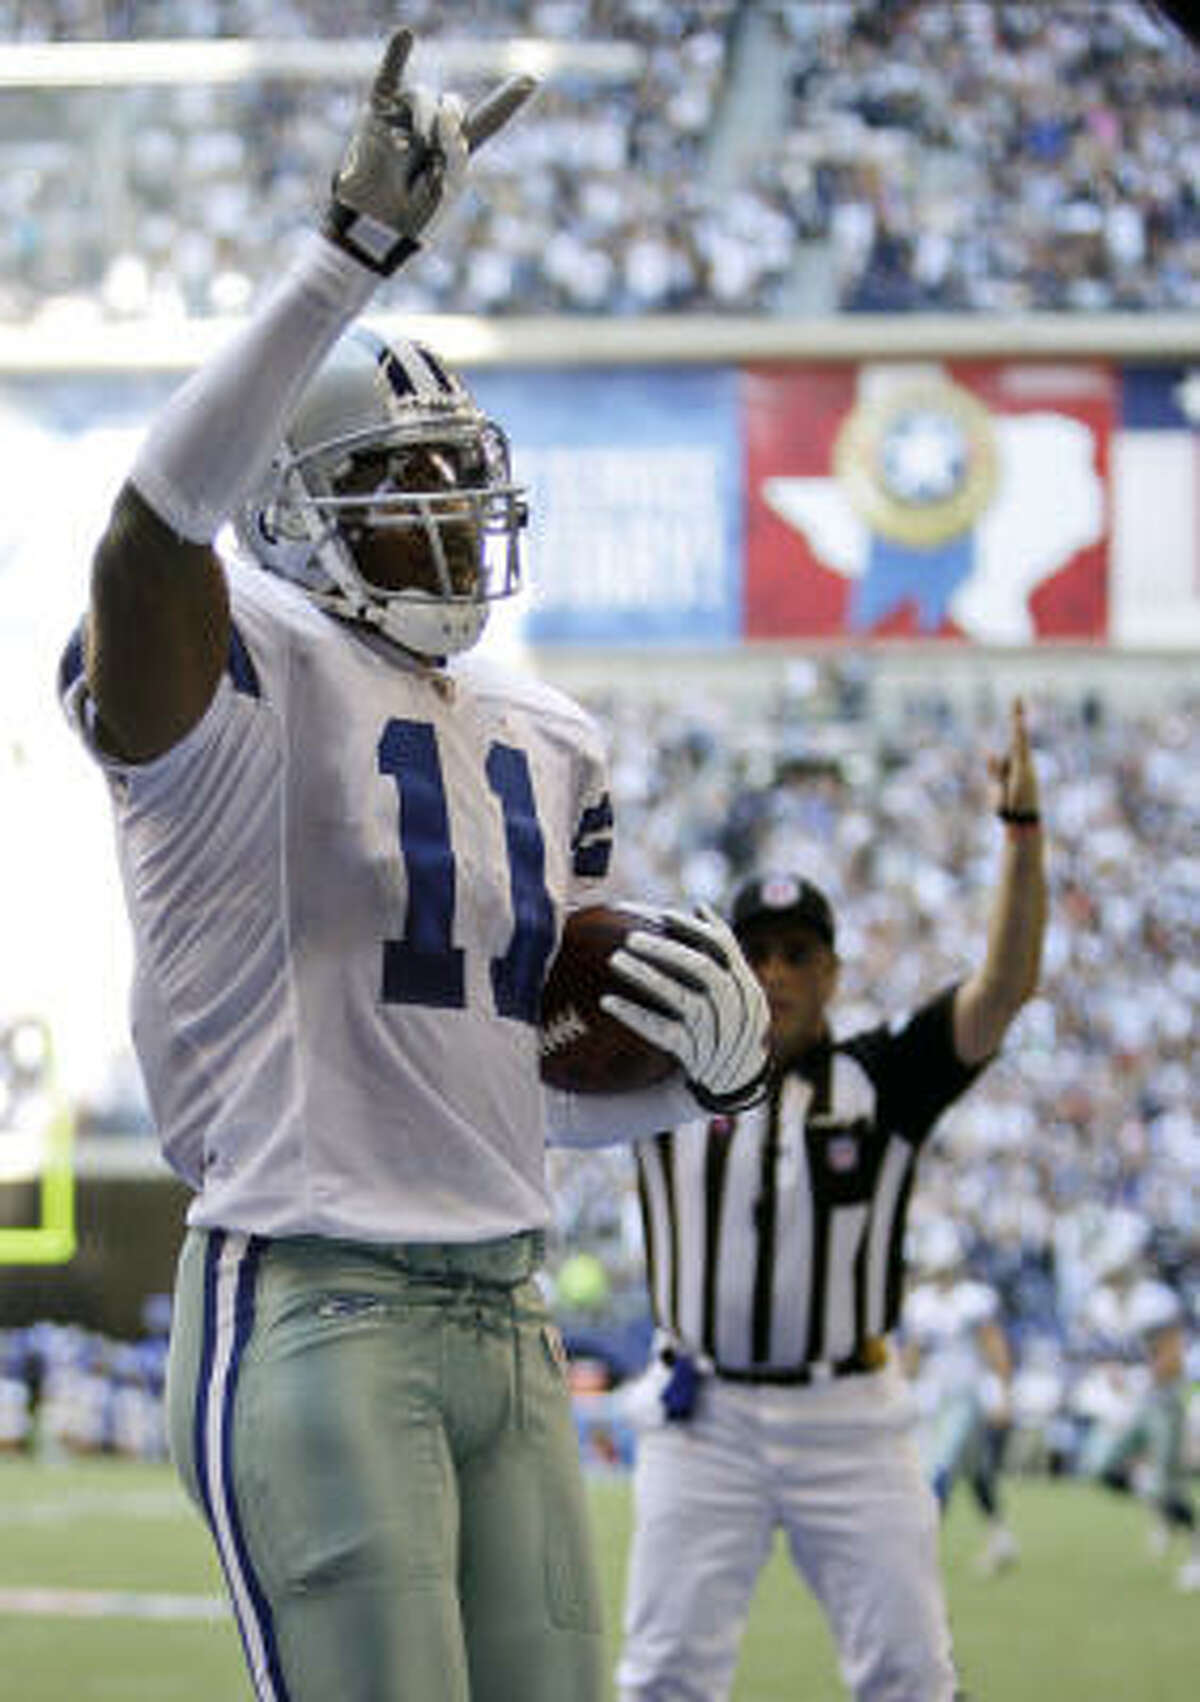 WR Roy Williams, No. 7 by Detroit in 2004 A one-time Pro Bowler, Williams was traded for draft picks to the Dallas Cowboys. First 1 1/2 years in Dallas largely disappointing.